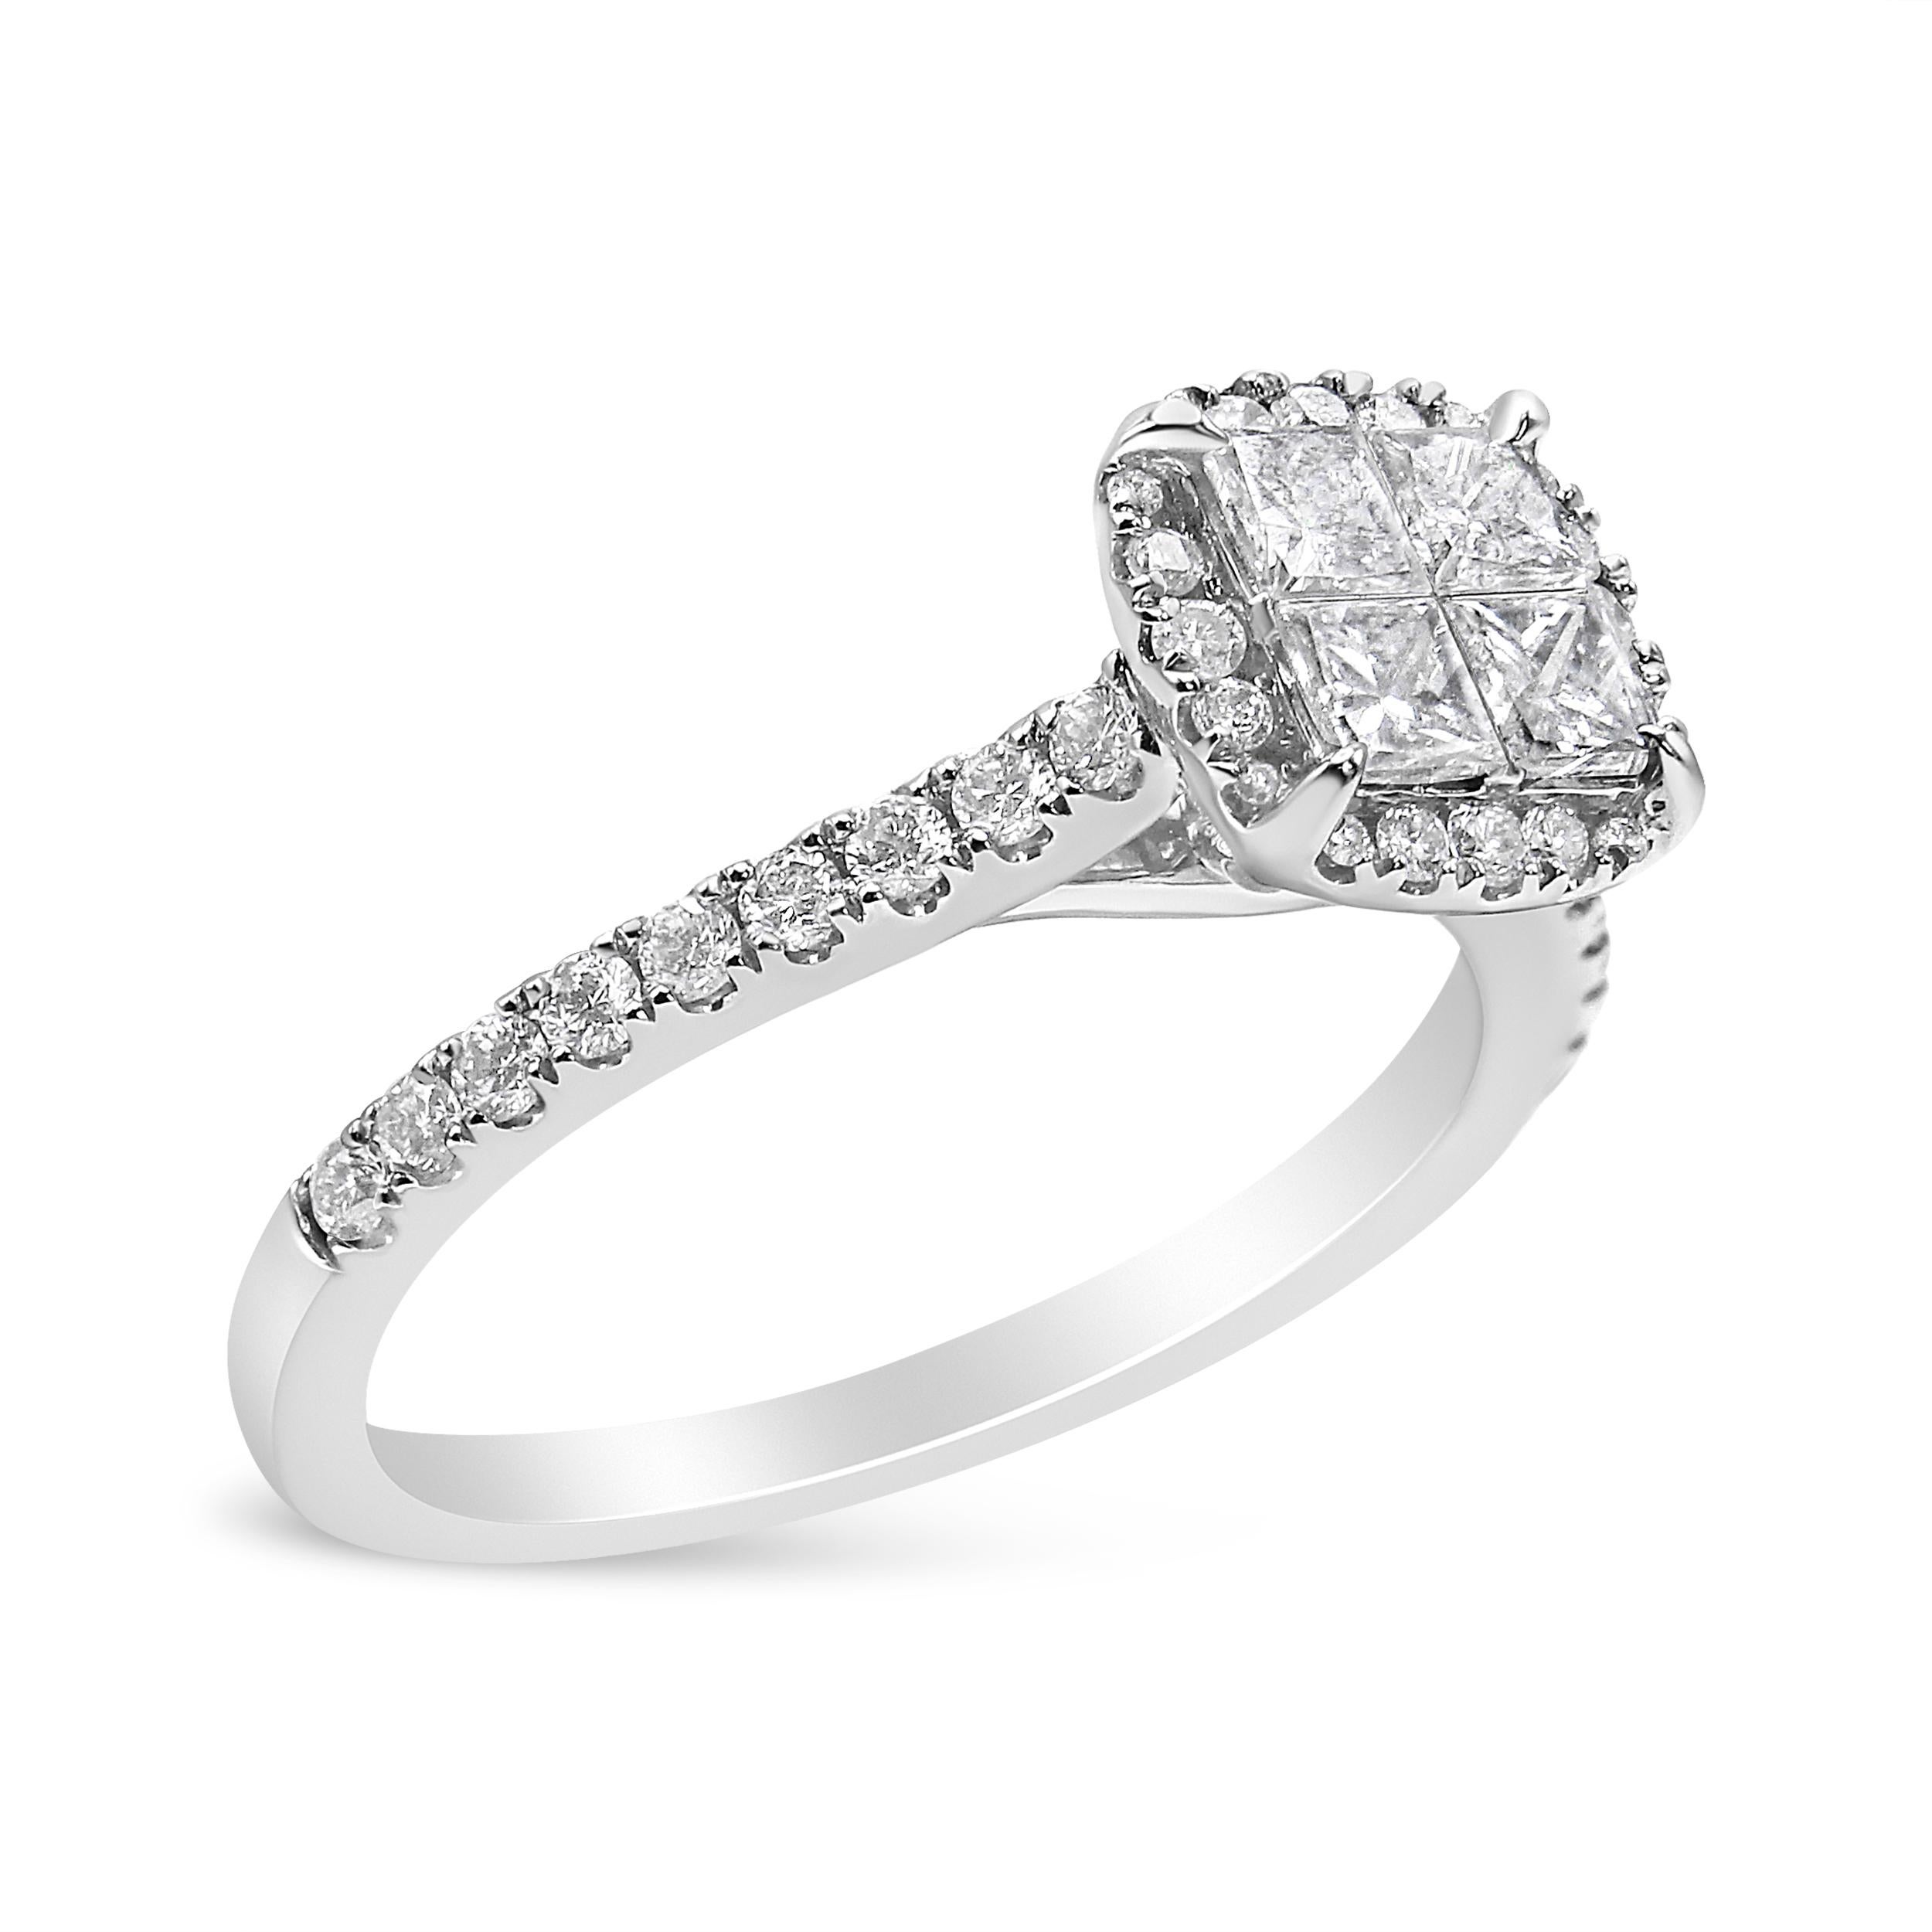 Contemporary 14K White Gold 1.0 Carat Diamond Composite Cushion Shaped Engagement Ring